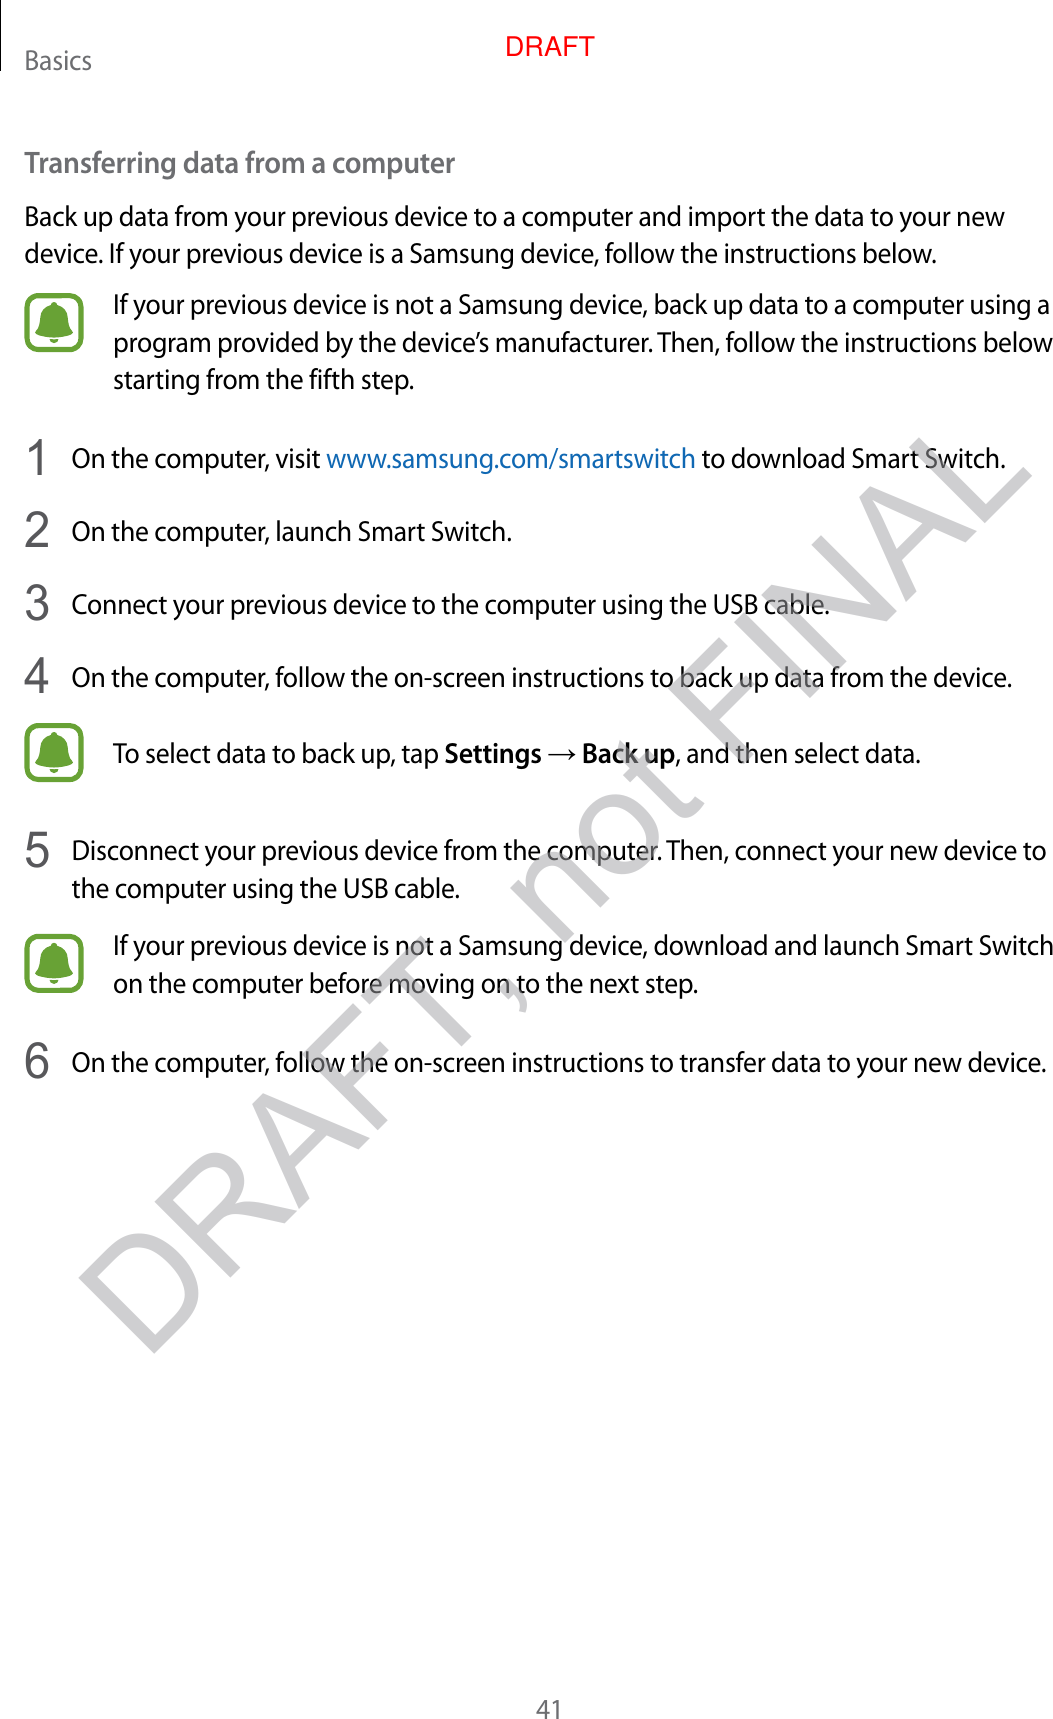 Basics41Transferring data fr om a c omputerBack up data from y our pr evious devic e to a c omput er and import the data to your new device . If your pr evious device is a Samsung device, follow the instructions below.If your previous device is not a Samsung devic e , back up data t o a comput er using a progr am pr o vided by the devic e’s manufacturer. T hen, f ollo w the instructions below starting from the fifth step.1  On the computer, visit www.samsung.com/smartswitch to download Smart Switch.2  On the computer, launch Smart Switch.3  Connect your pr evious device t o the comput er using the USB cable .4  On the computer, follow the on-scr een instructions to back up data fr om the device.To select data to back up , tap Settings → Back up, and then select data.5  Disconnect your previous devic e fr om the comput er. Then, connect your new device to the computer using the USB cable .If your previous device is not a Samsung devic e , do wnload and launch Smart Switch on the computer bef or e mo ving on t o the next step.6  On the computer, follow the on-scr een instructions to transf er da ta to y our new devic e .DRAFT, not FINALDRAFT